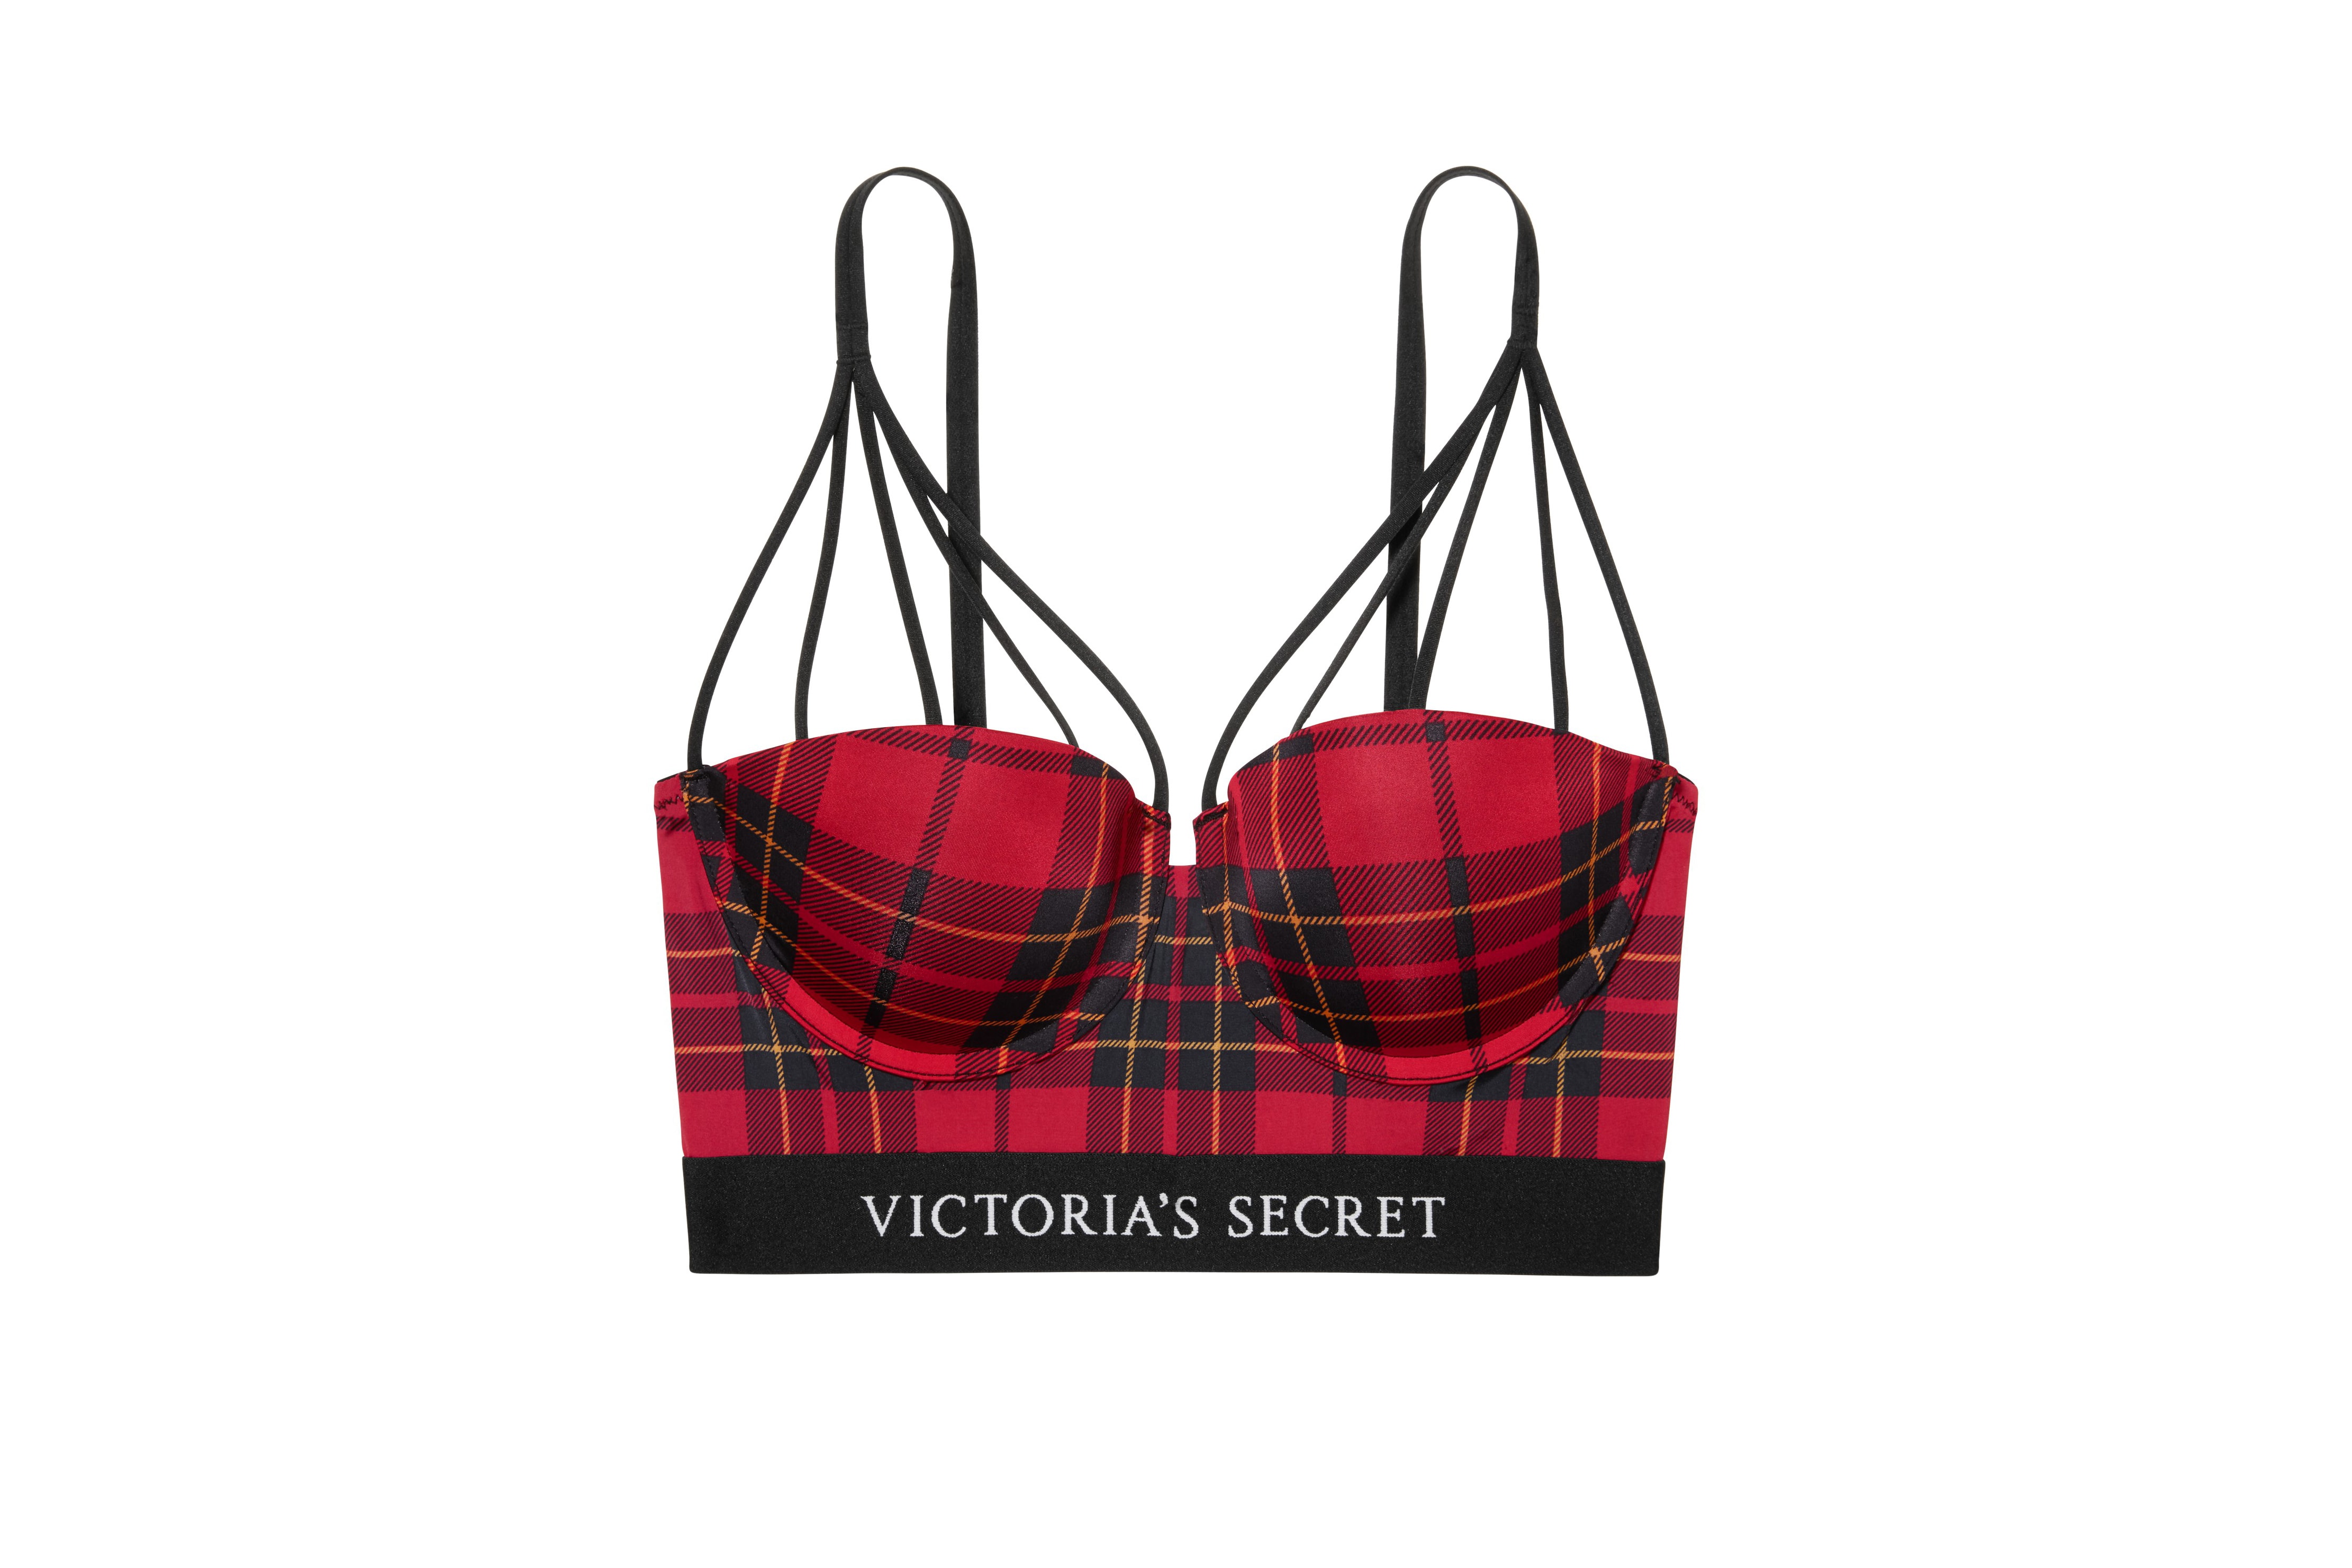 Looking for a NEW Silhouette? - Victoria's Secret Email Archive